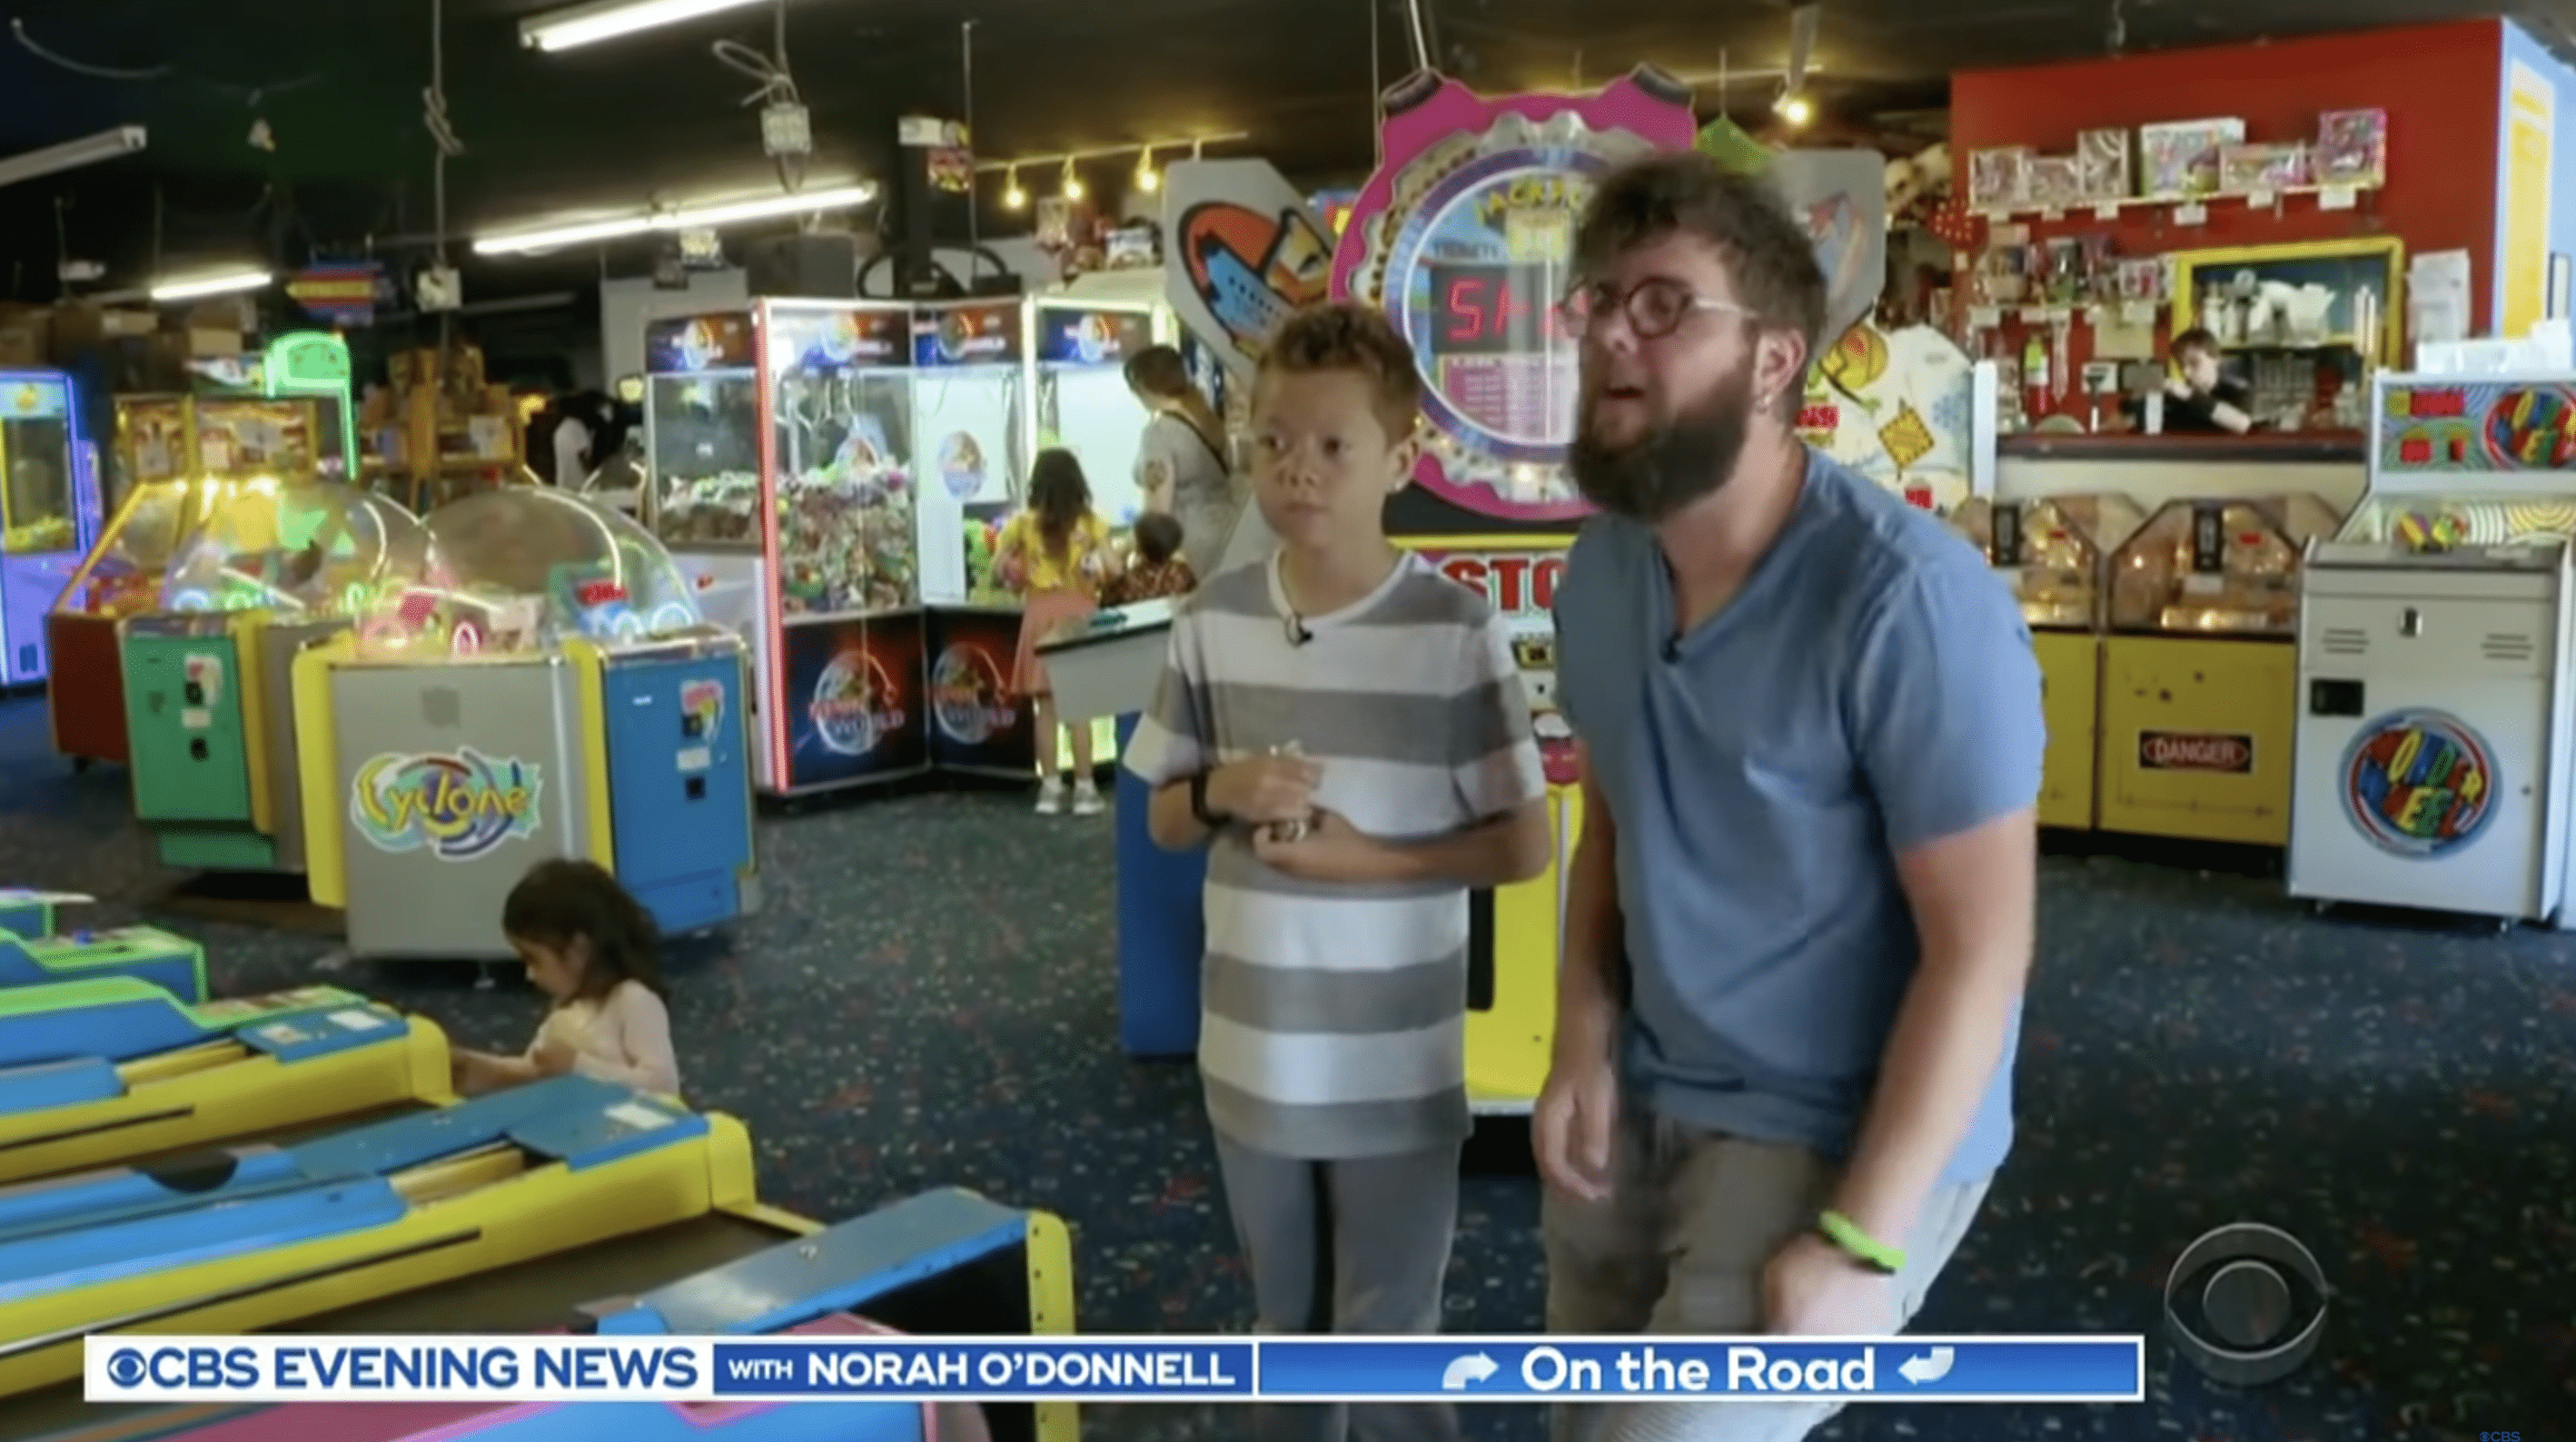 Damien enjoys playing sports and engaging in other fun activities with his foster father, Lanning. | Photo: YouTube.com/CBS Evening News